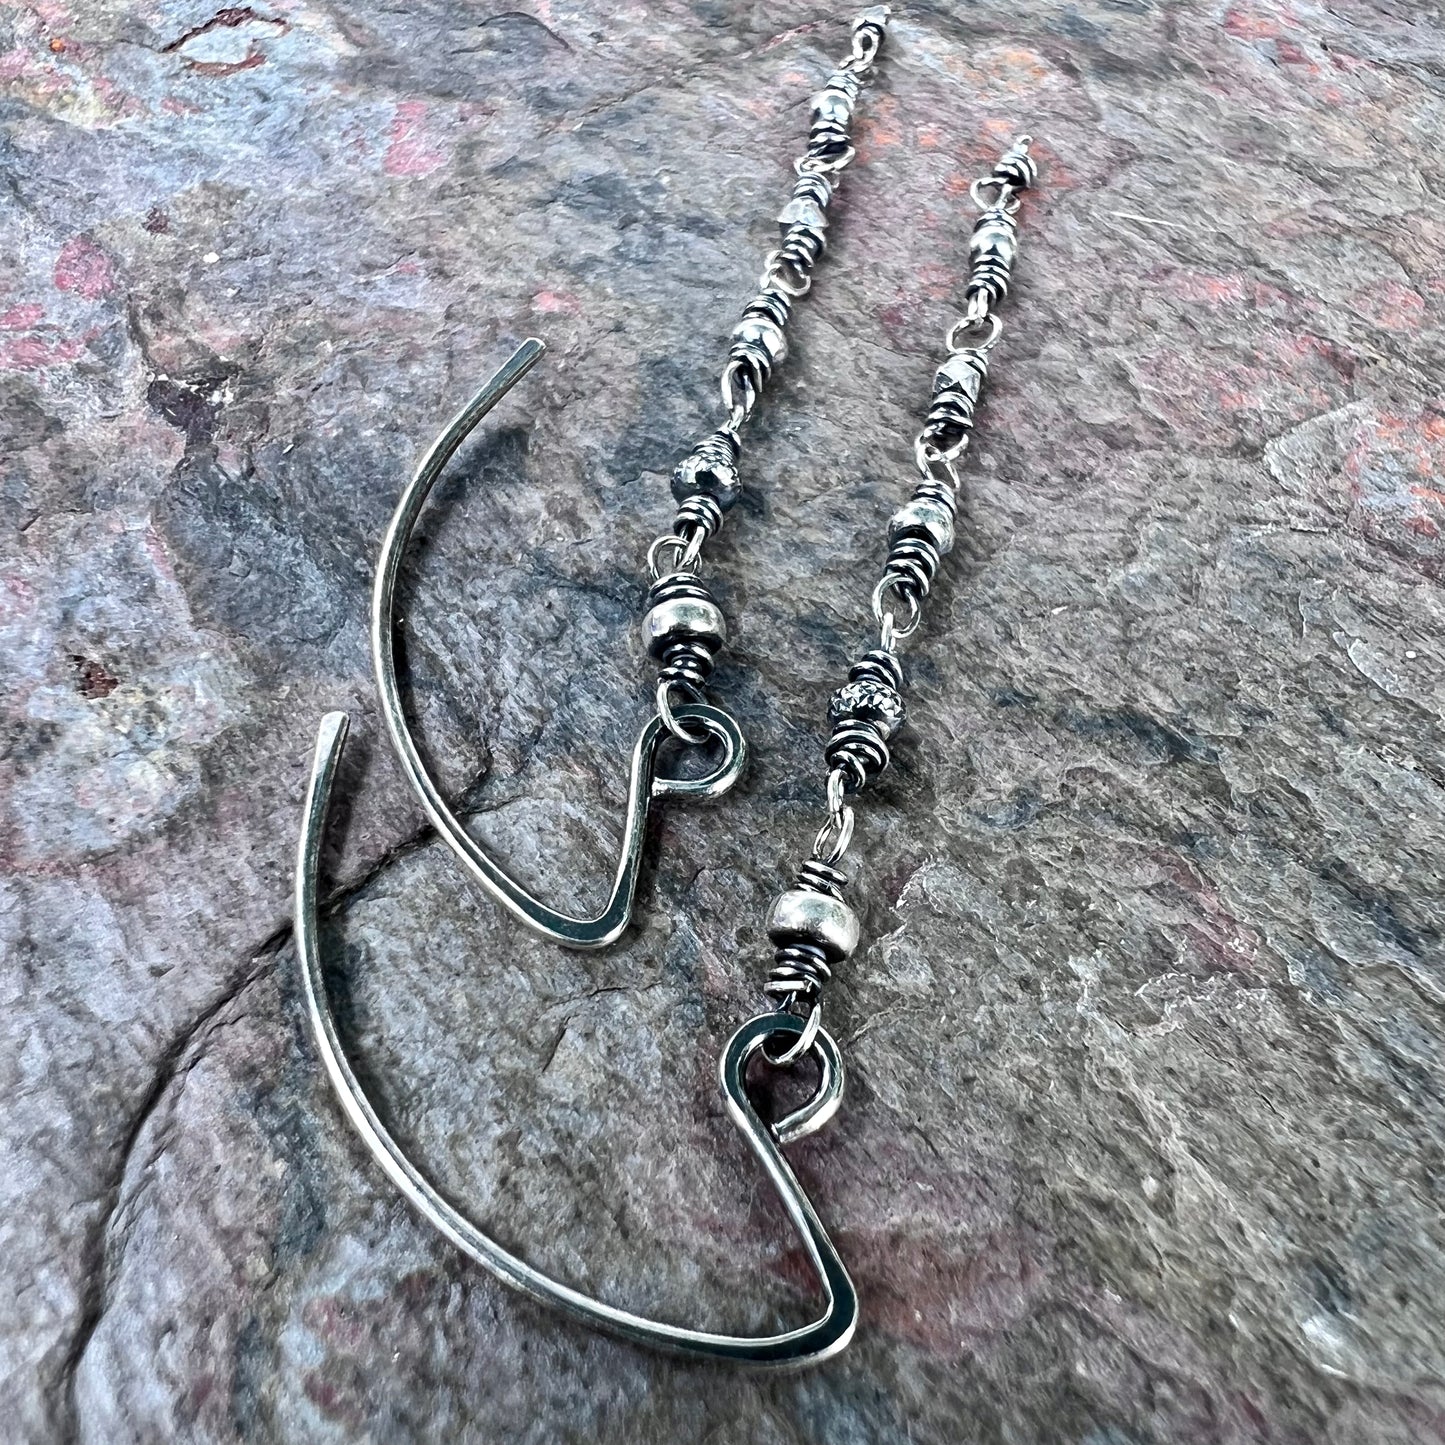 Long Sterling Silver Wire-wrapped Beaded Earrings - Modern and Lightweight Everyday Earrings